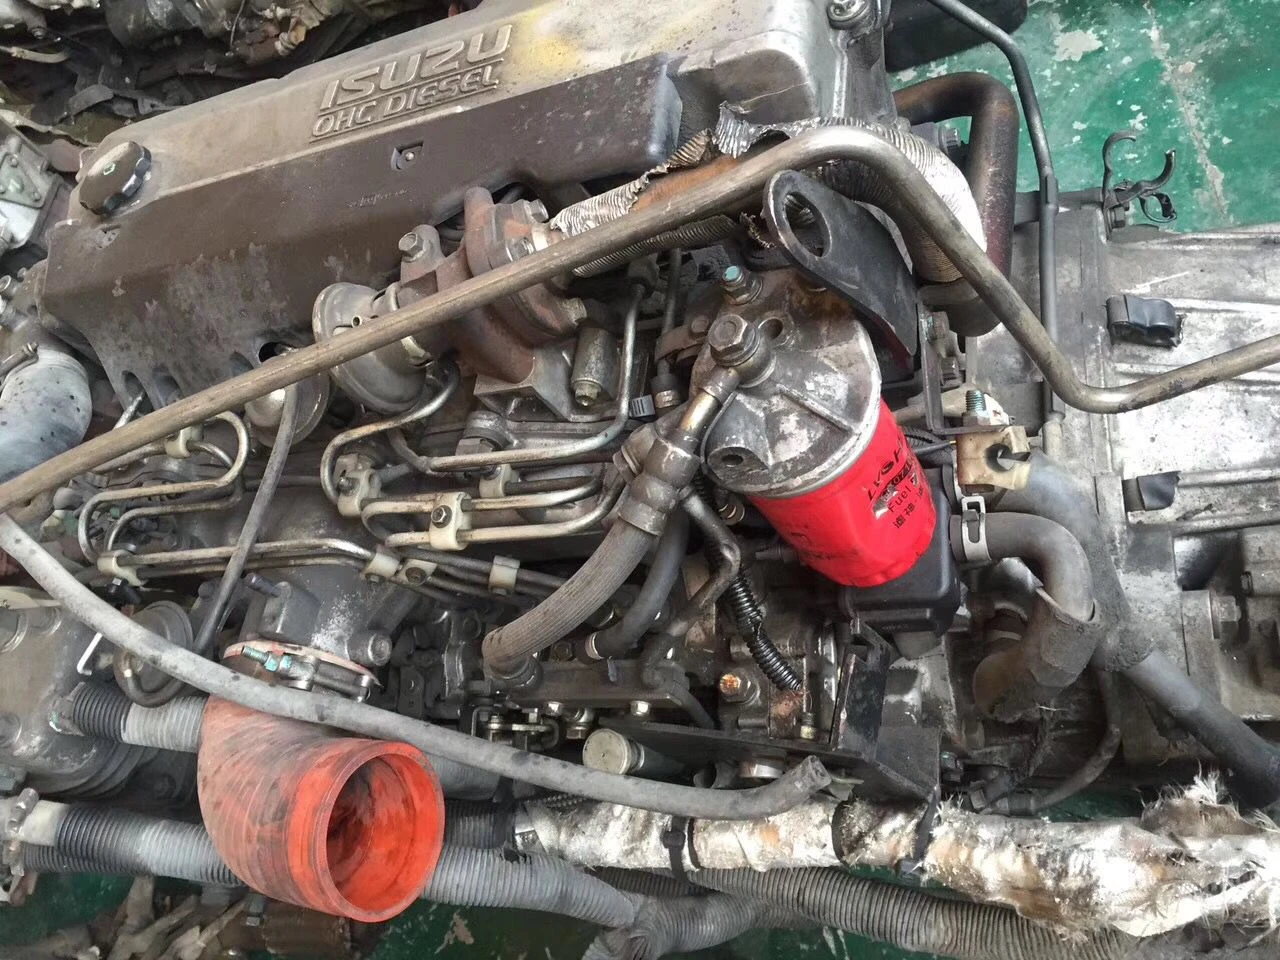 Turbo Charged 4.8L 4HE1 Used Diesel Engine For NPR Truck